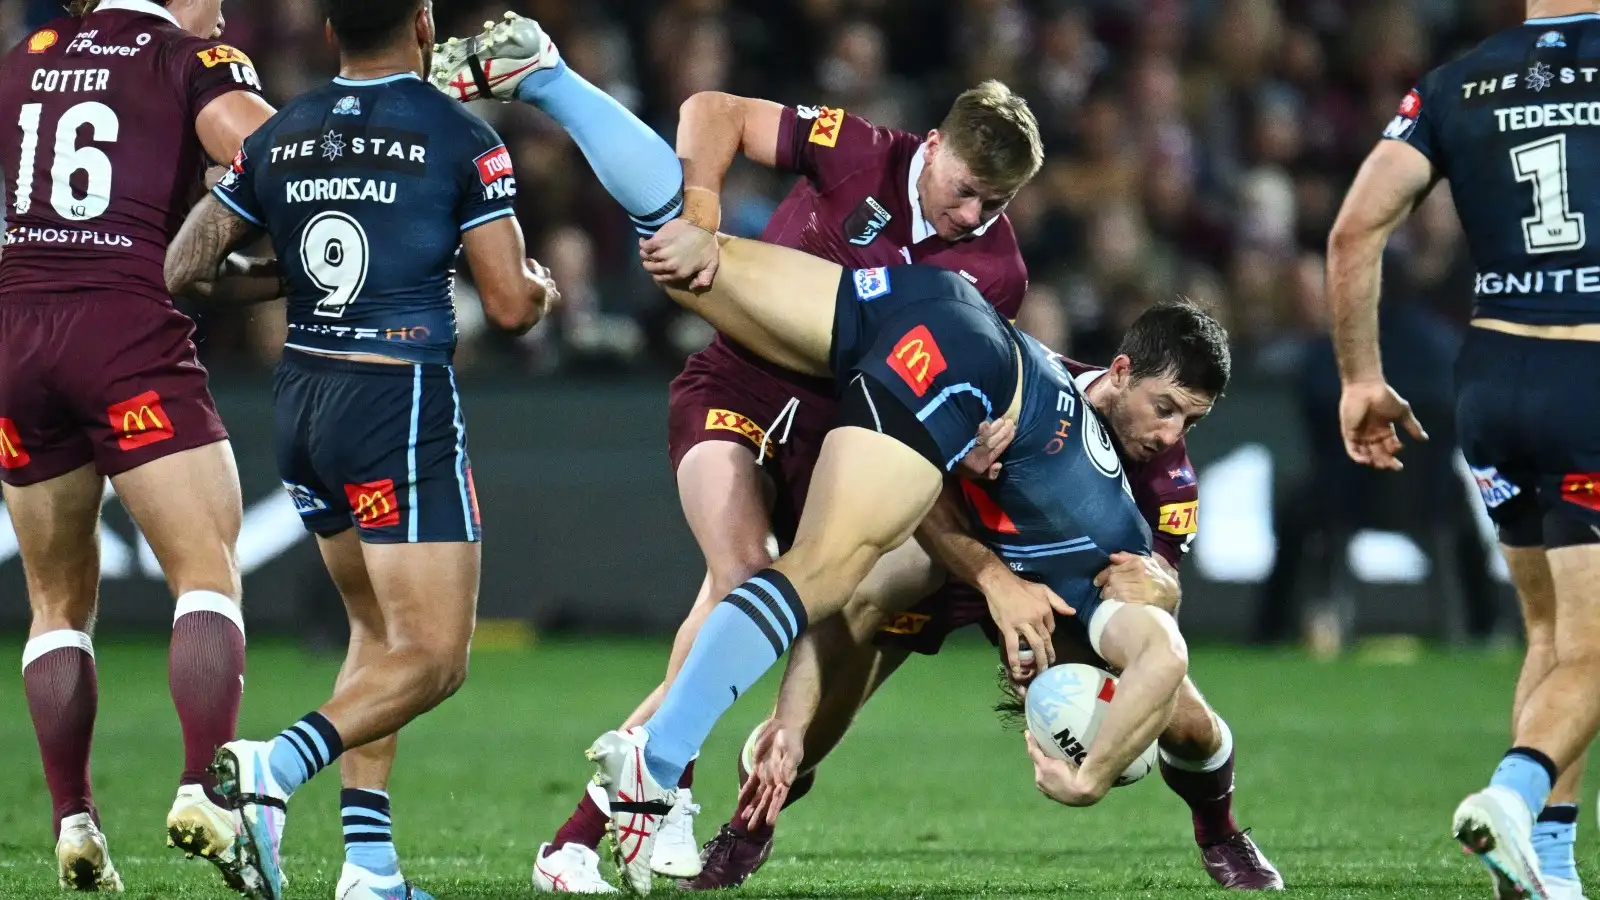 State of Origin triggers debate over War of the Roses and the international game